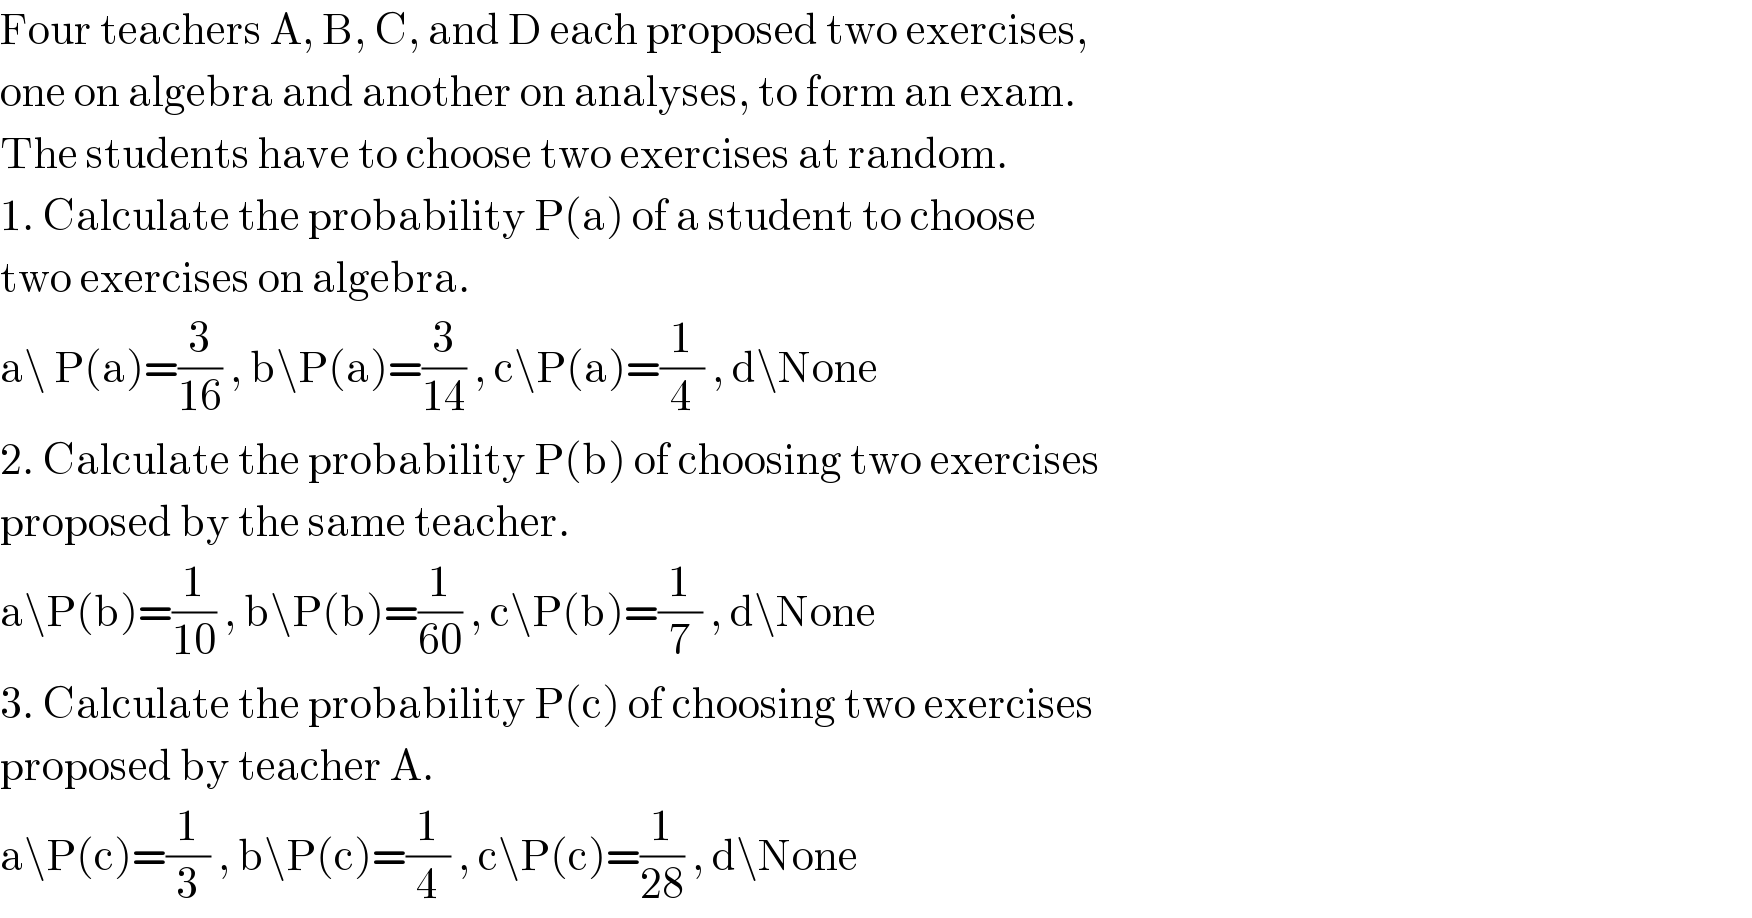 Four teachers A, B, C, and D each proposed two exercises,  one on algebra and another on analyses, to form an exam.  The students have to choose two exercises at random.  1. Calculate the probability P(a) of a student to choose  two exercises on algebra.  a\ P(a)=(3/(16)) , b\P(a)=(3/(14)) , c\P(a)=(1/4) , d\None  2. Calculate the probability P(b) of choosing two exercises  proposed by the same teacher.  a\P(b)=(1/(10)) , b\P(b)=(1/(60)) , c\P(b)=(1/7) , d\None  3. Calculate the probability P(c) of choosing two exercises  proposed by teacher A.  a\P(c)=(1/3) , b\P(c)=(1/4) , c\P(c)=(1/(28)) , d\None  